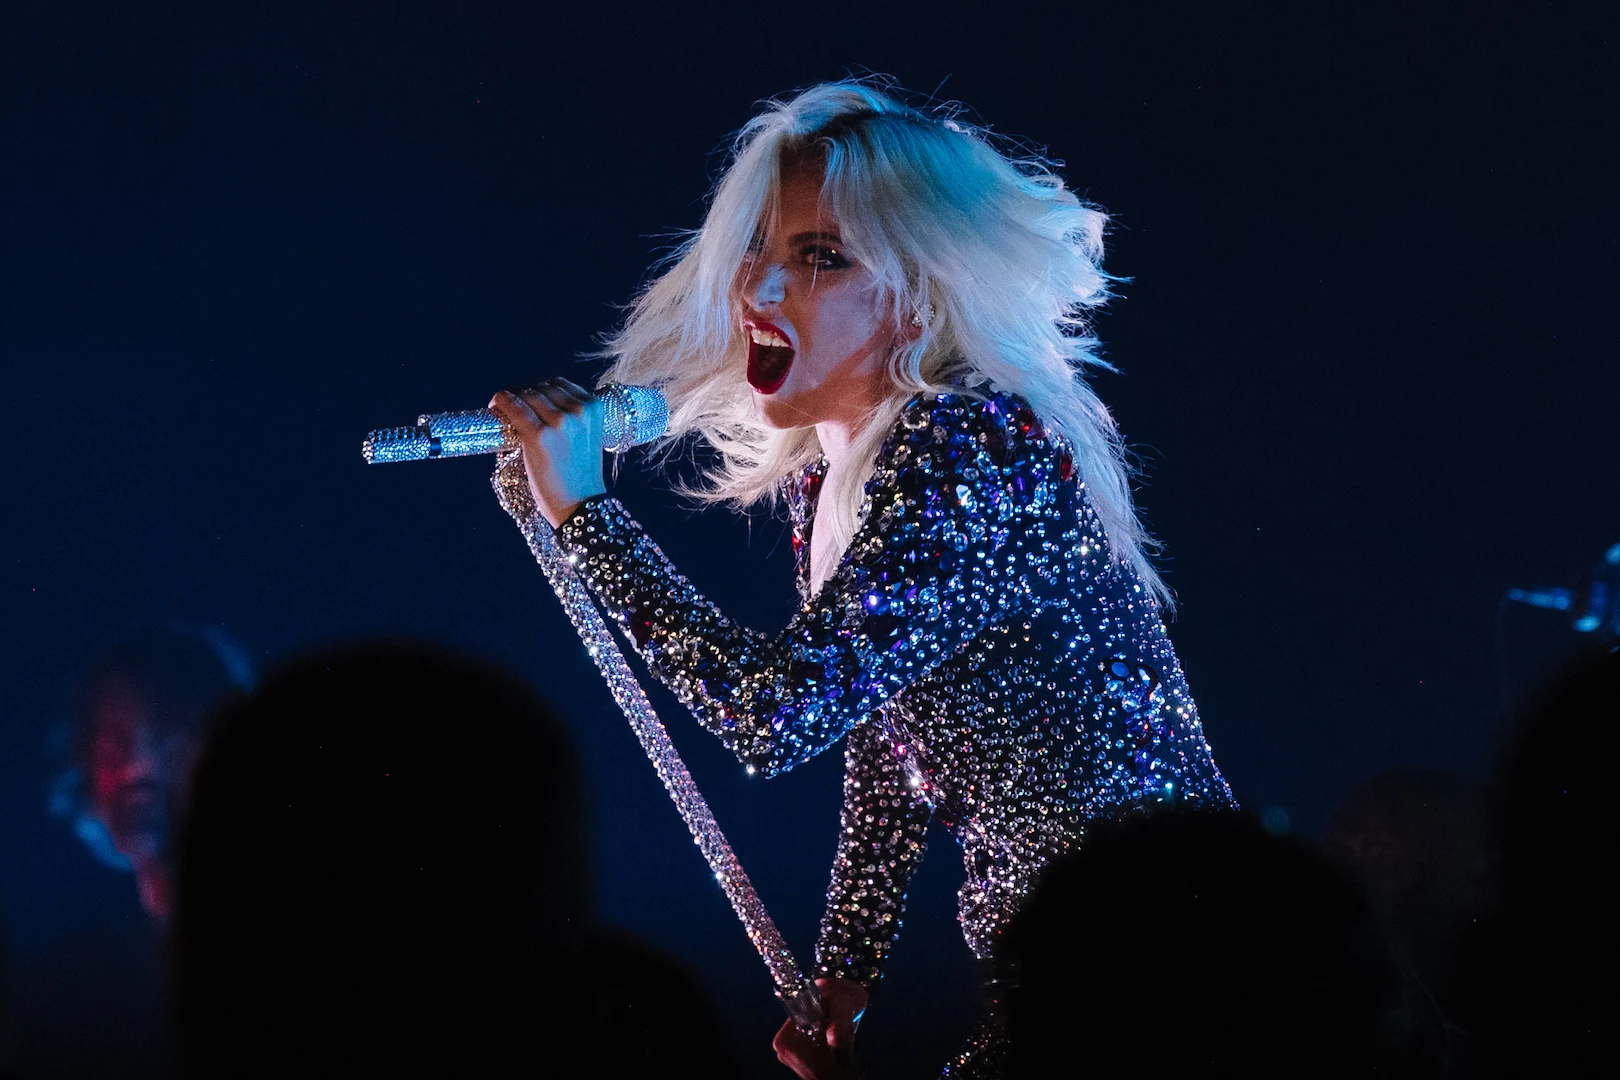 Lauryn Schaffner on X: Carrie Underwood is opening for Guns N